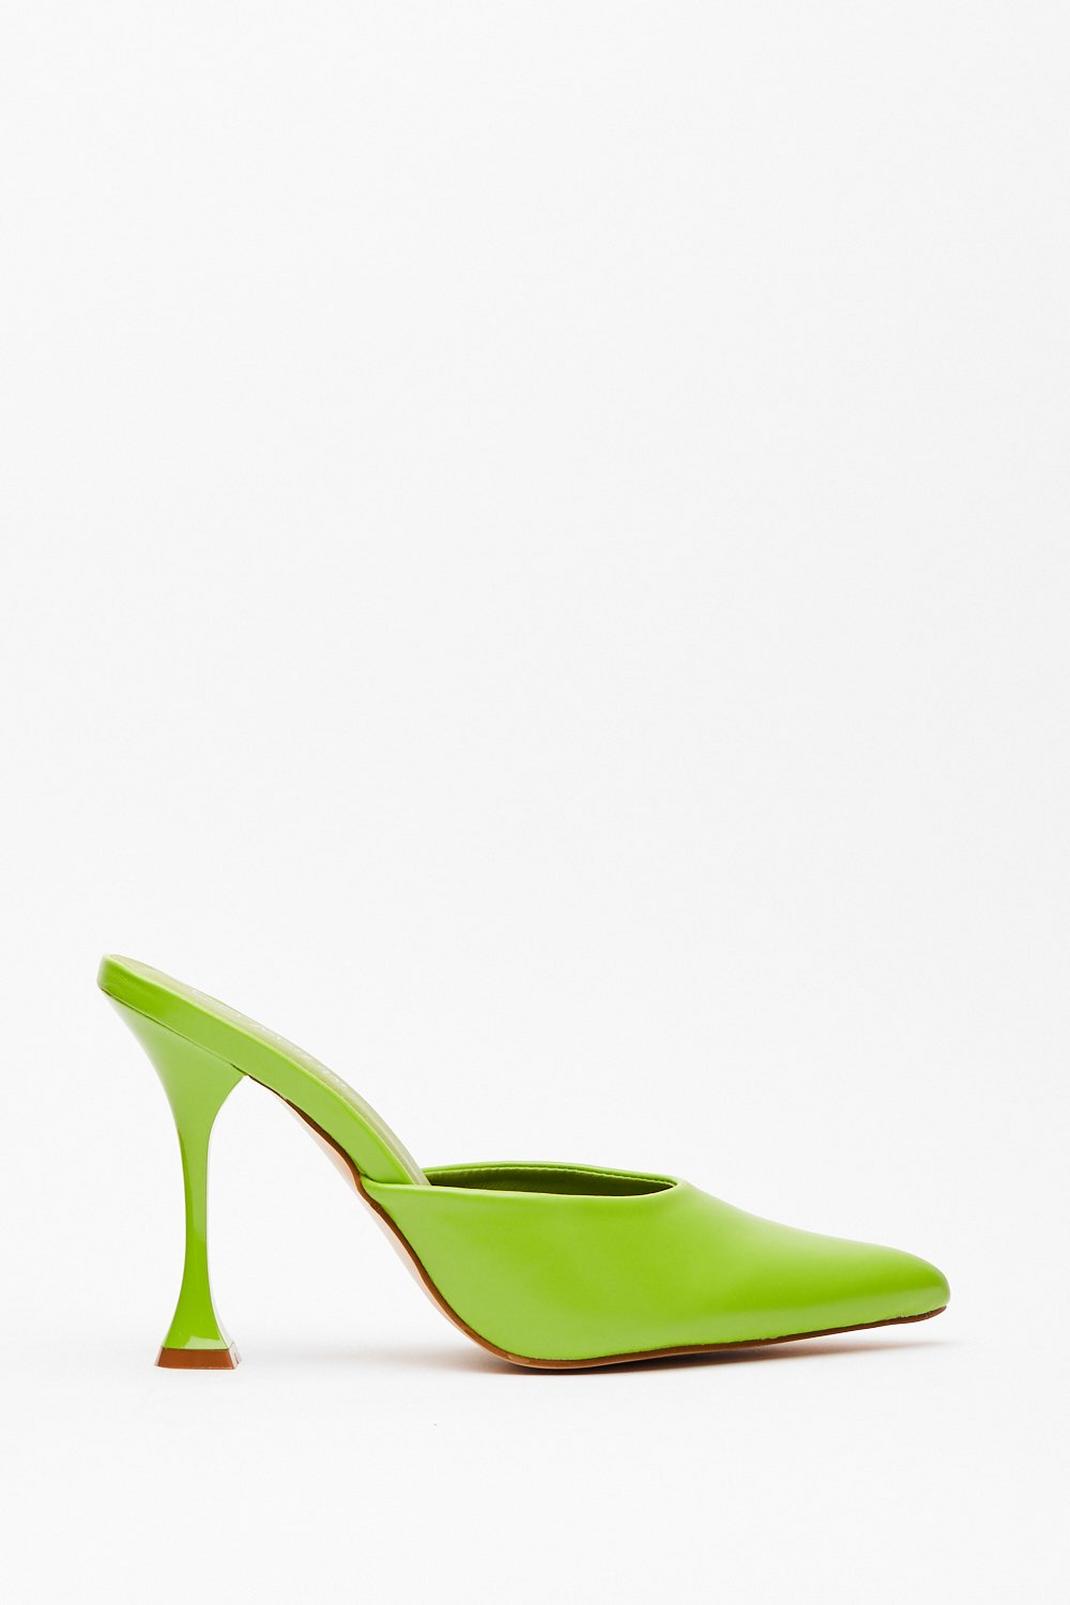 Chartreuse Faux Leather Pointed Toe Stiletto Heels image number 1